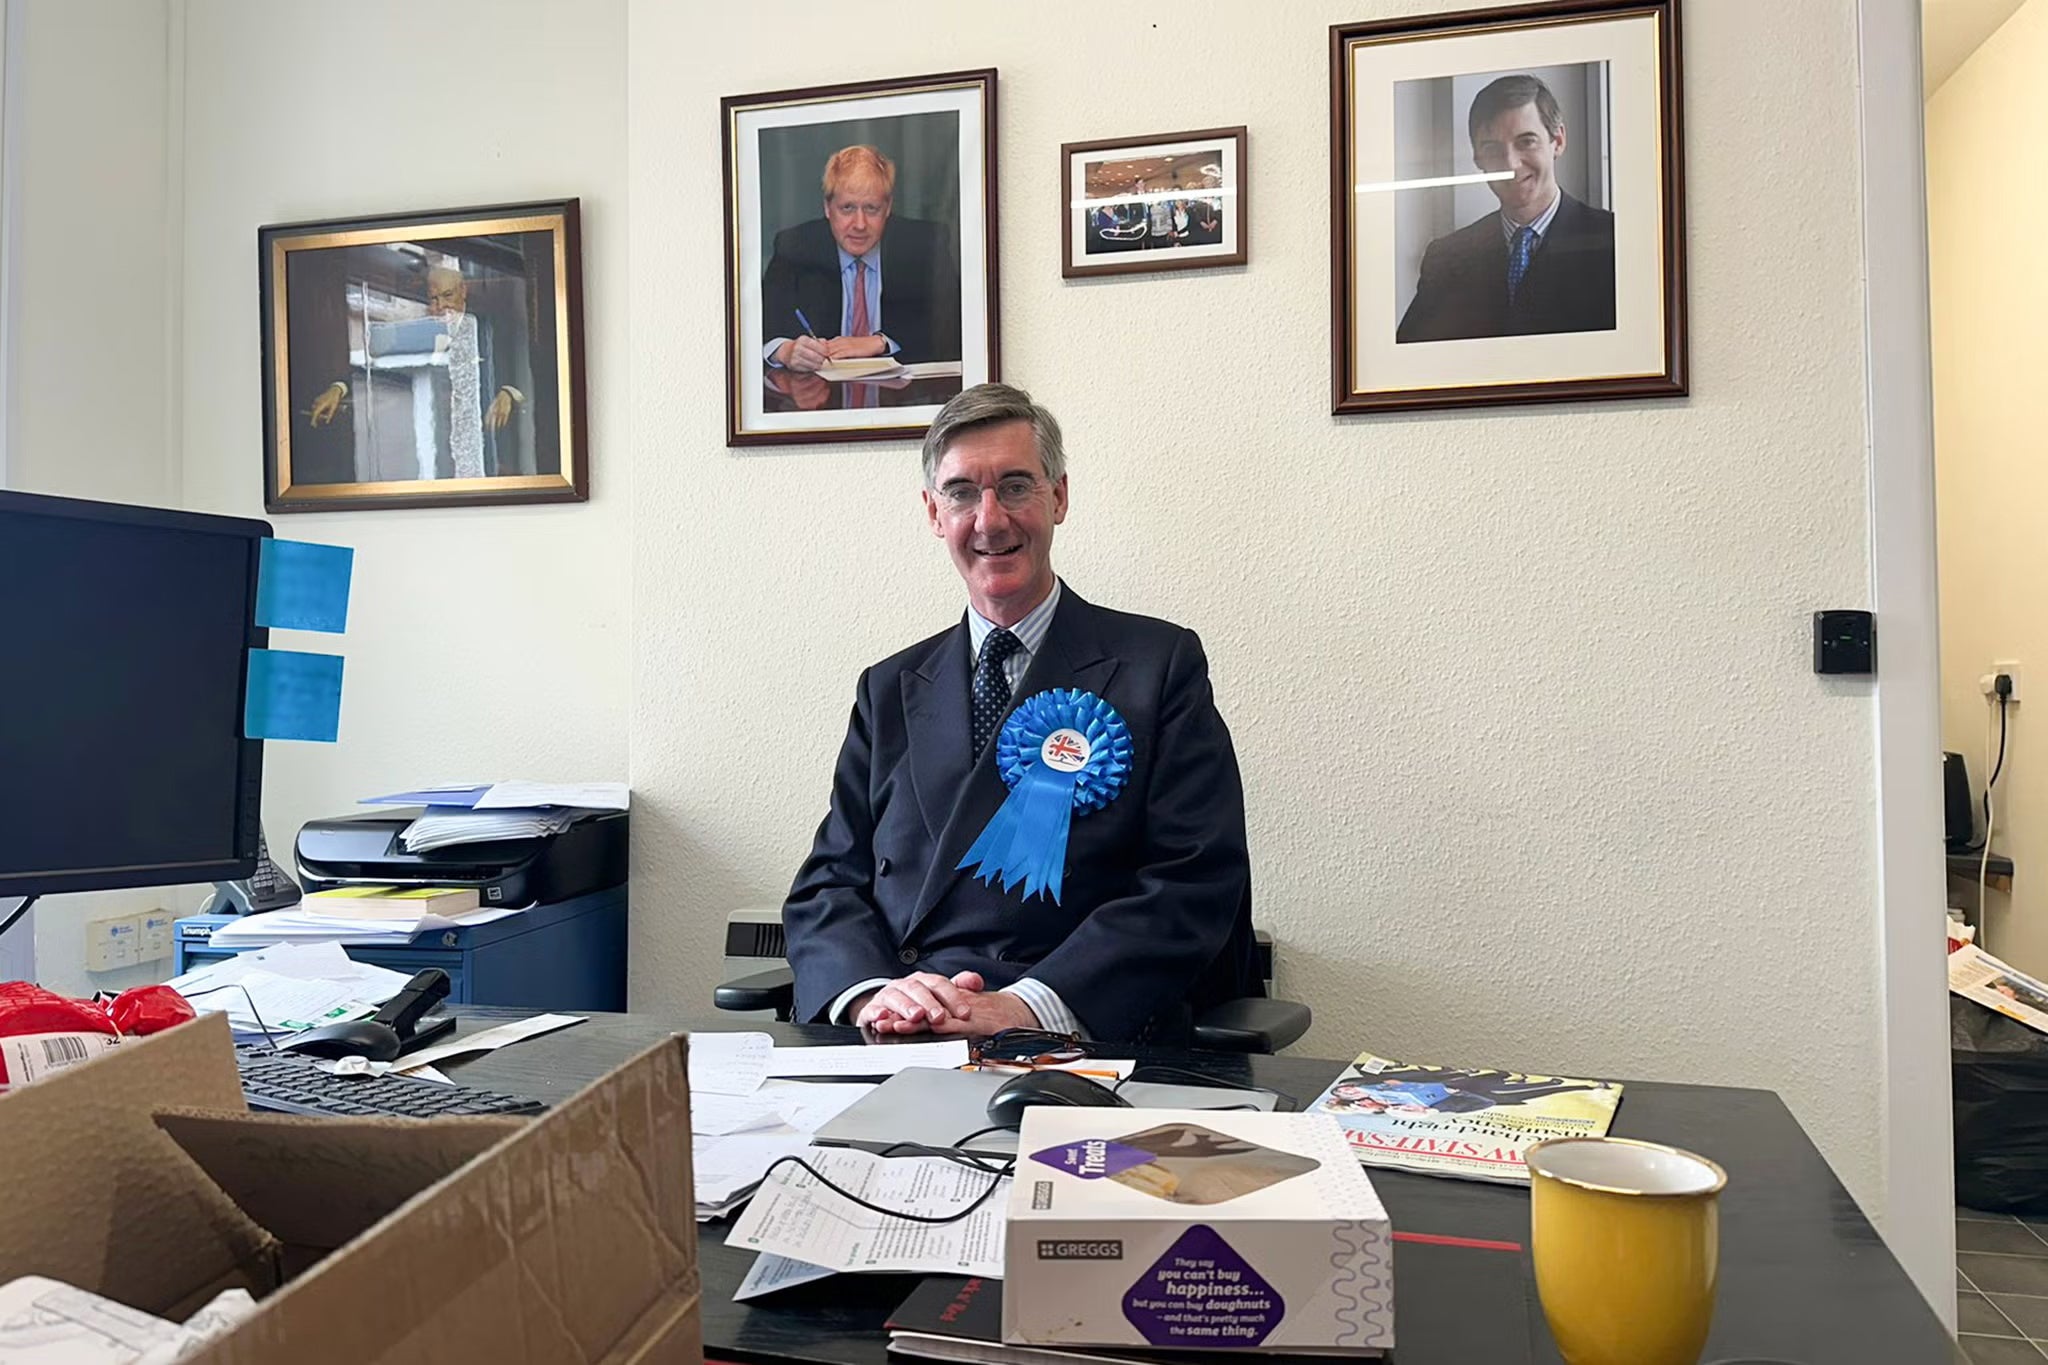 Jacob Rees-Mogg takes a break for lunch at the North East Somerset and Hanham Conservative Association office in Keynsham